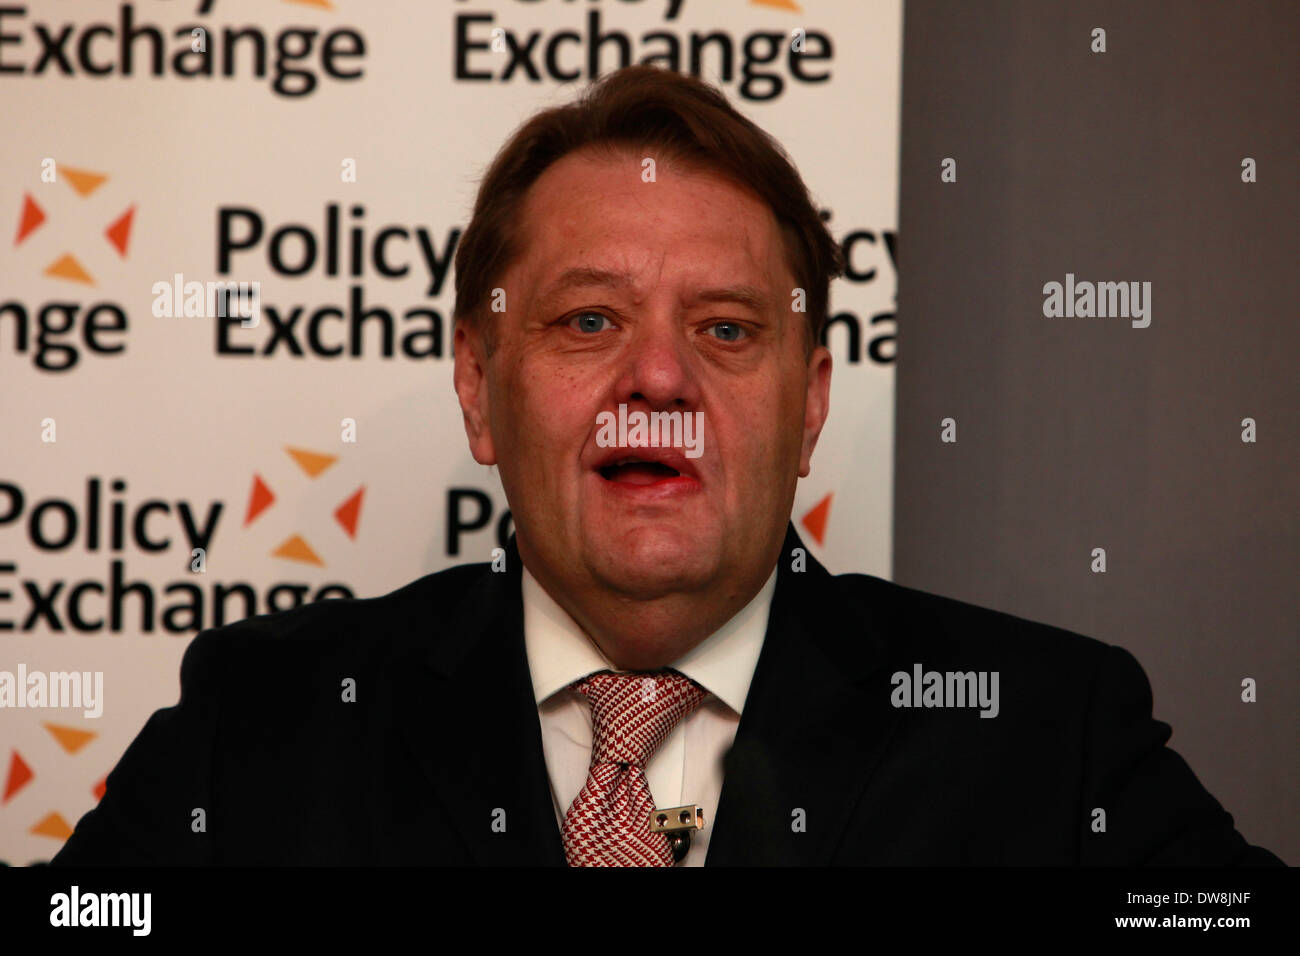 John Hayes MP is seen during the Policy Exchange conference in central London 18 April 2012, Policy Exchange is hosting a major full day conference looking at the future of the labour market and welfare and skills policy in the UK. Stock Photo